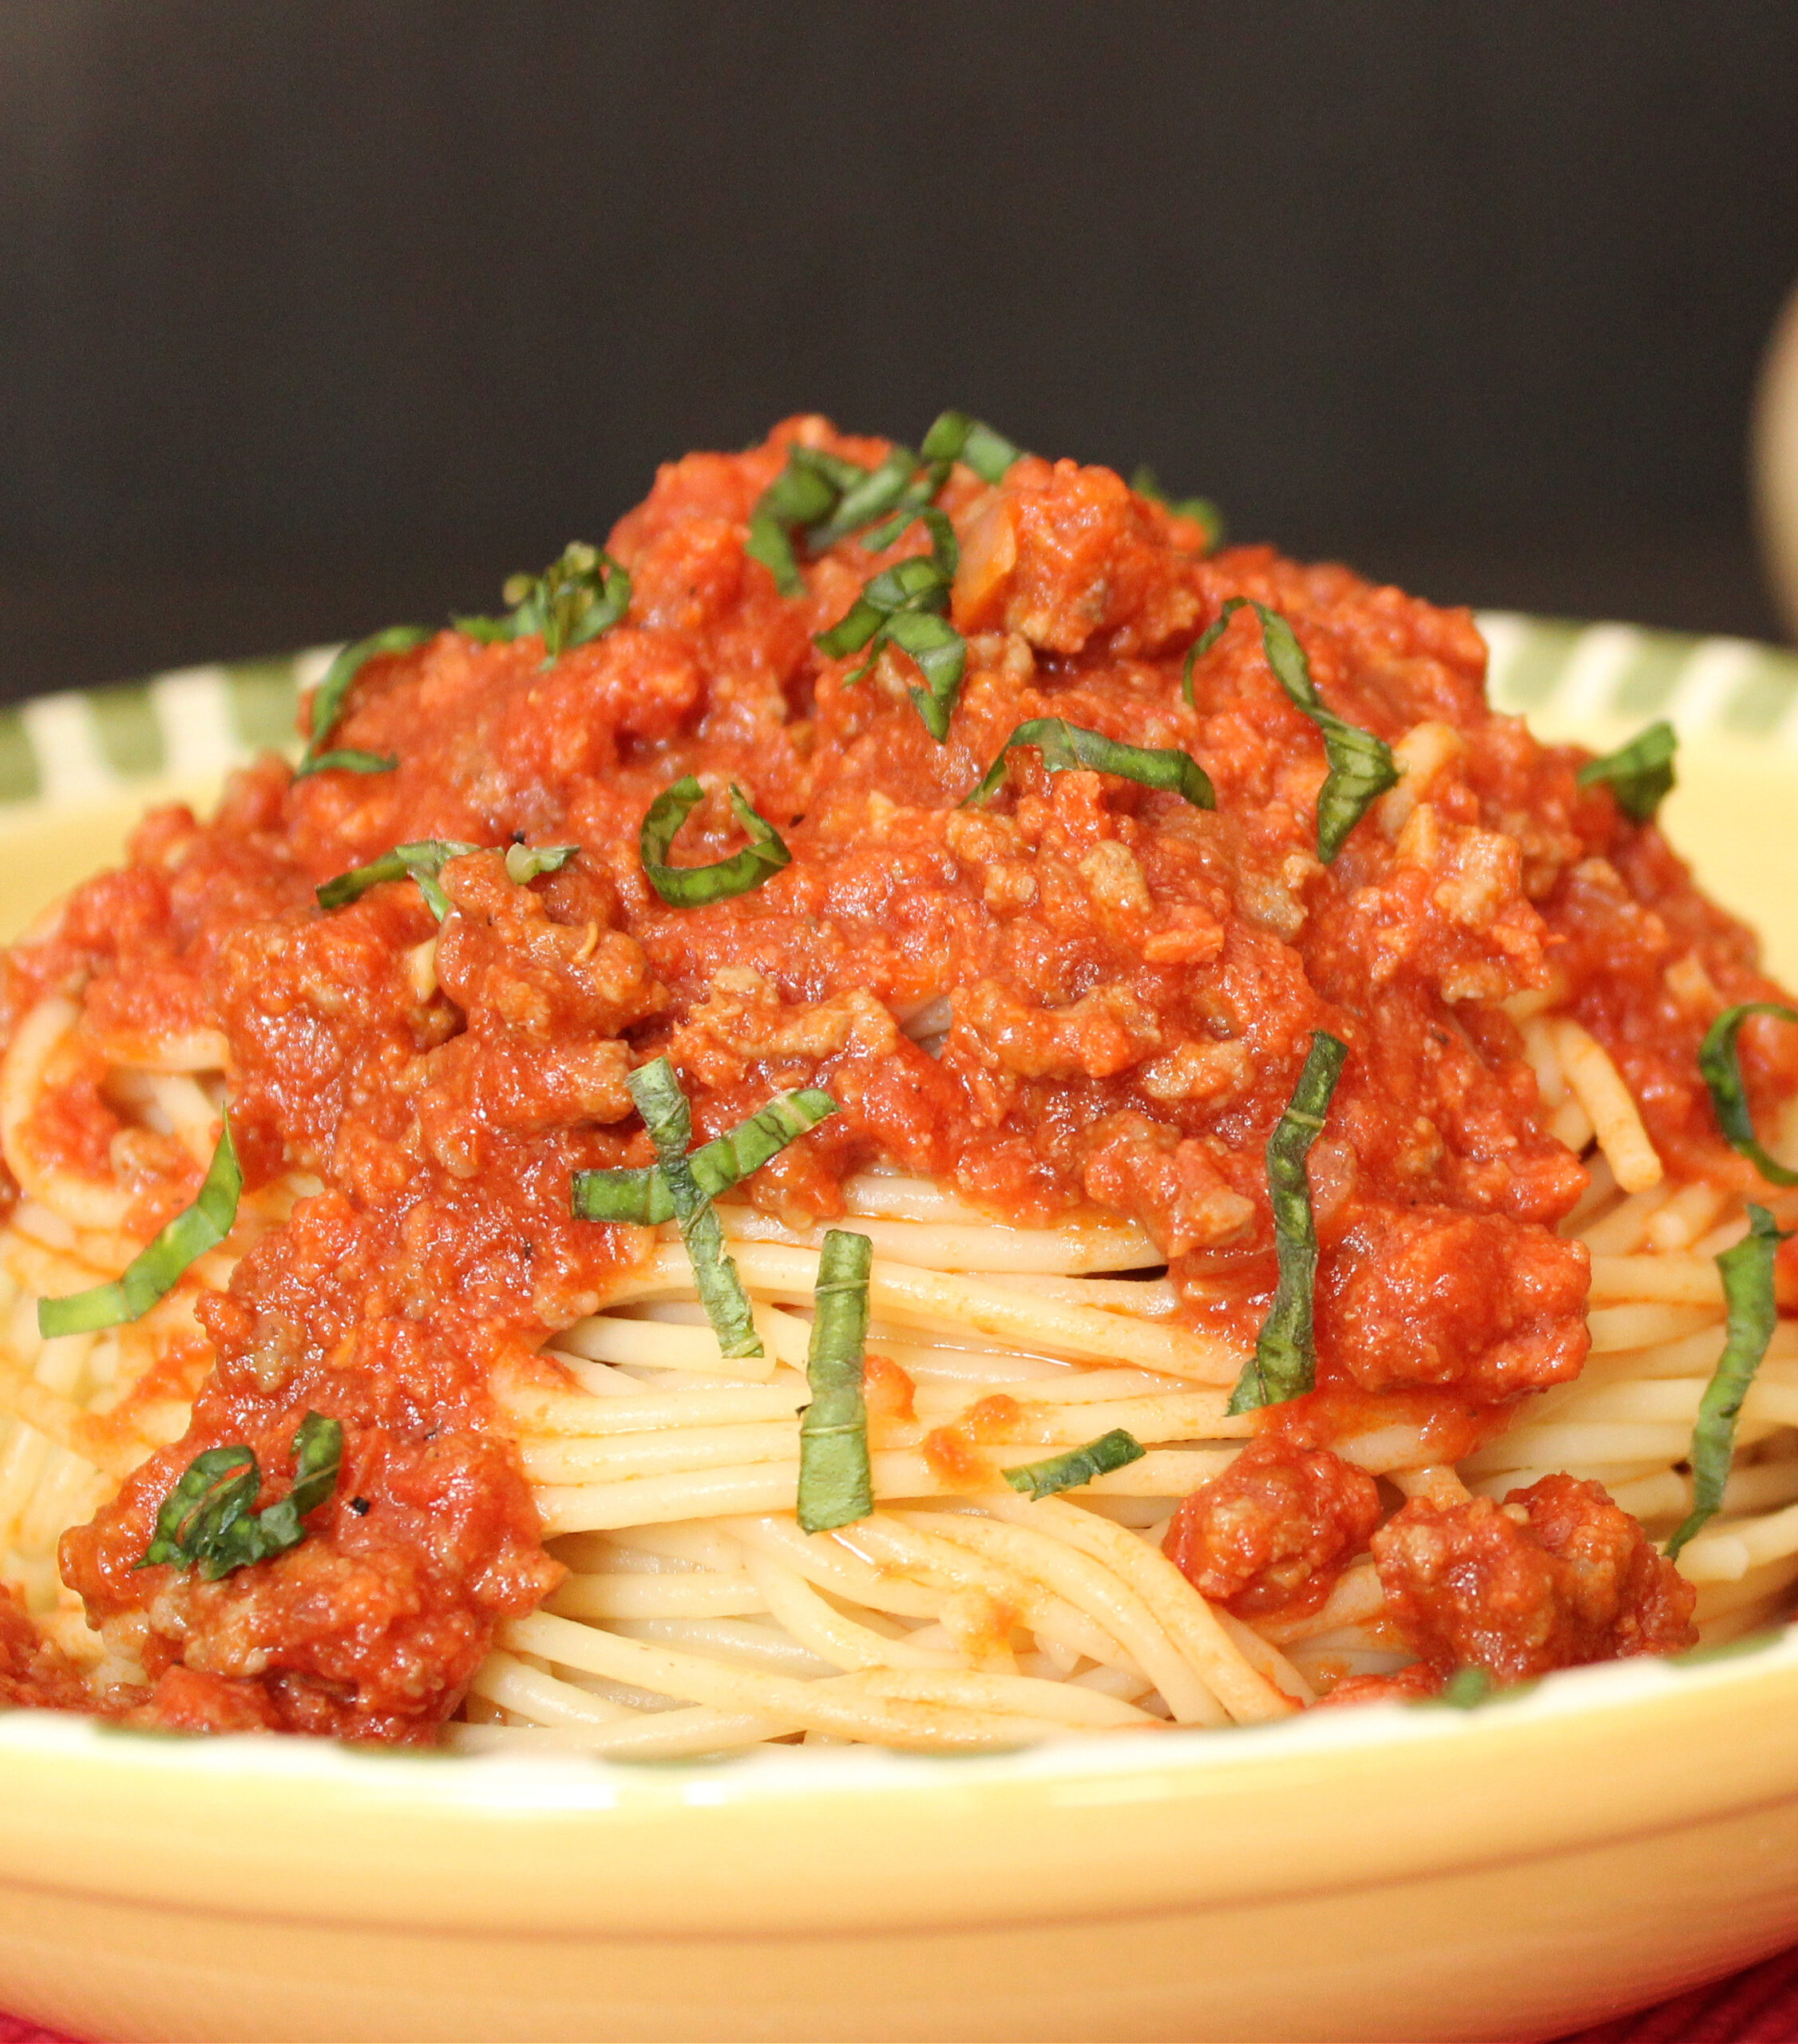 Spaghetti With Beef and Linguica Red Sauce